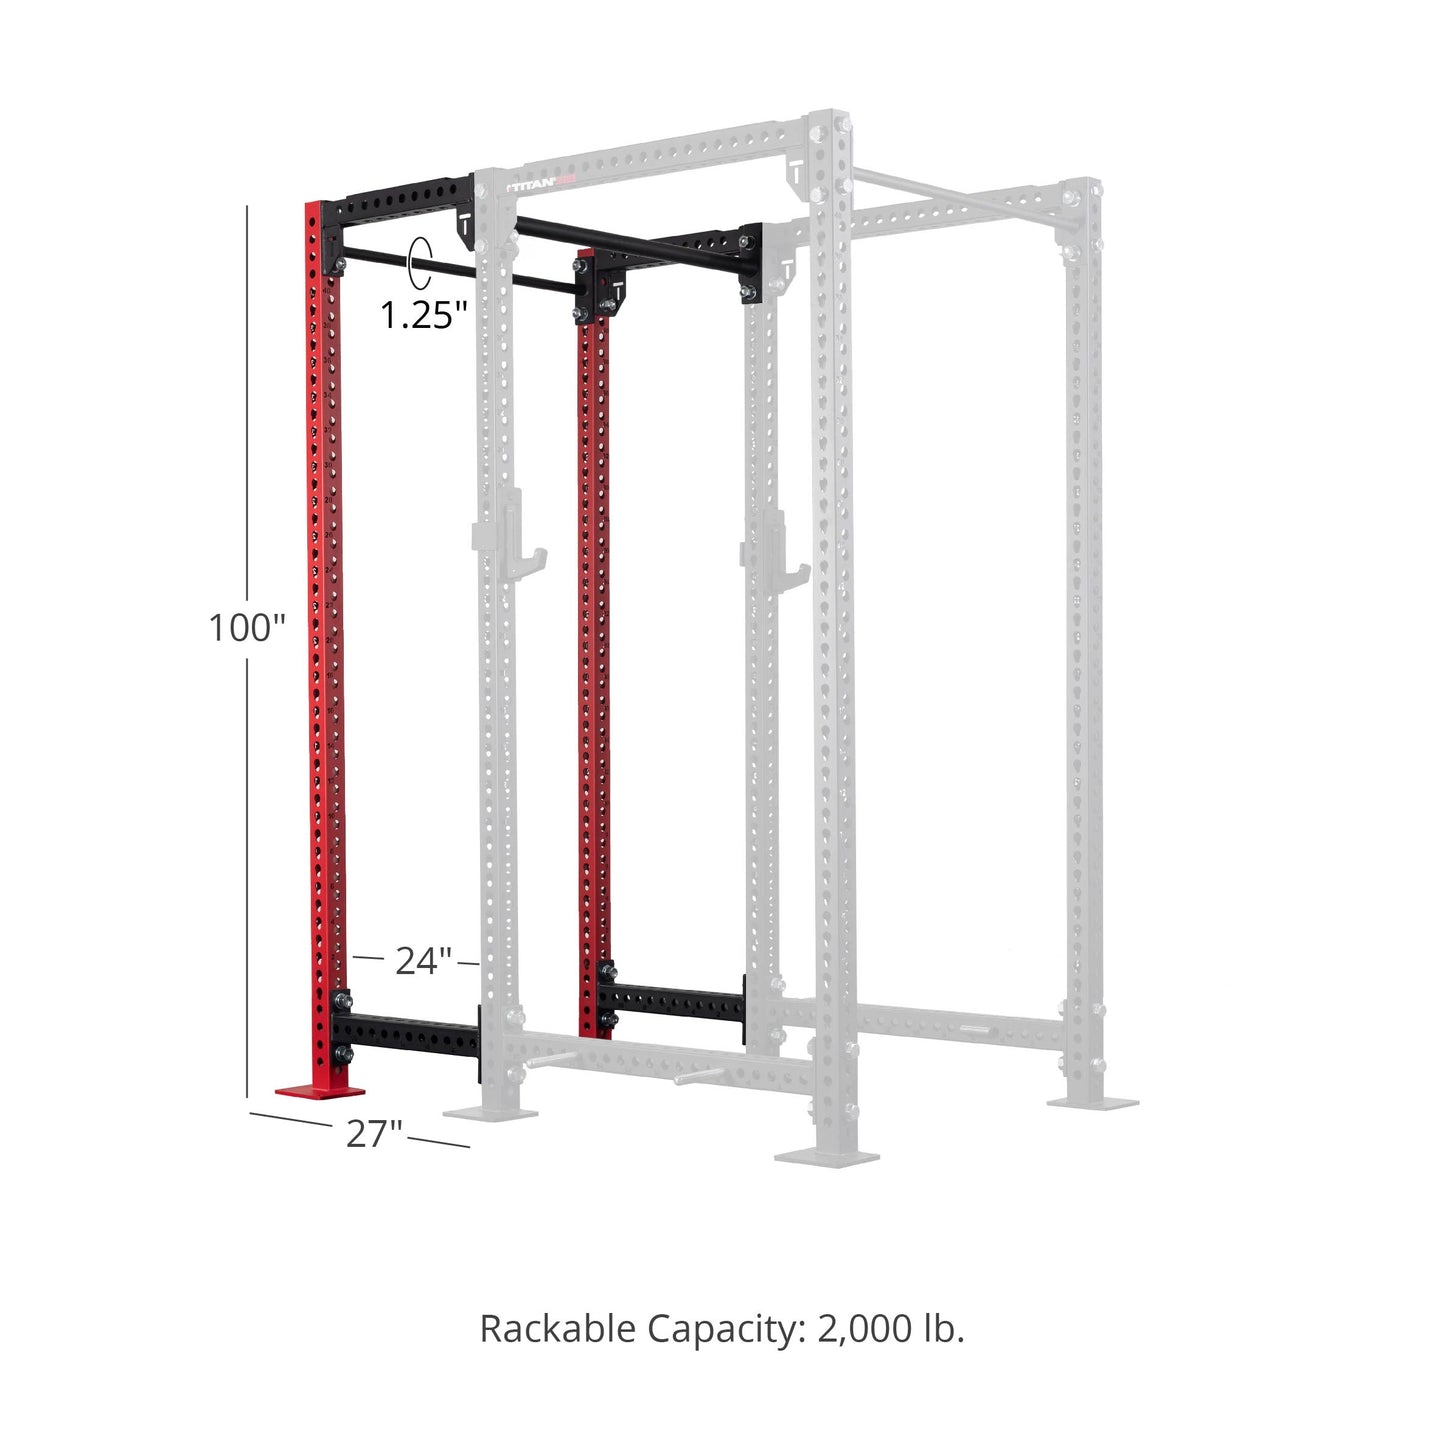 TITAN Series 24" Extension Kit - Extension Color: Red - Extension Height: 100" - Crossmember: 1.25" Pull-Up Bar | Red / 100" / 1.25" Pull-Up Bar - view 149